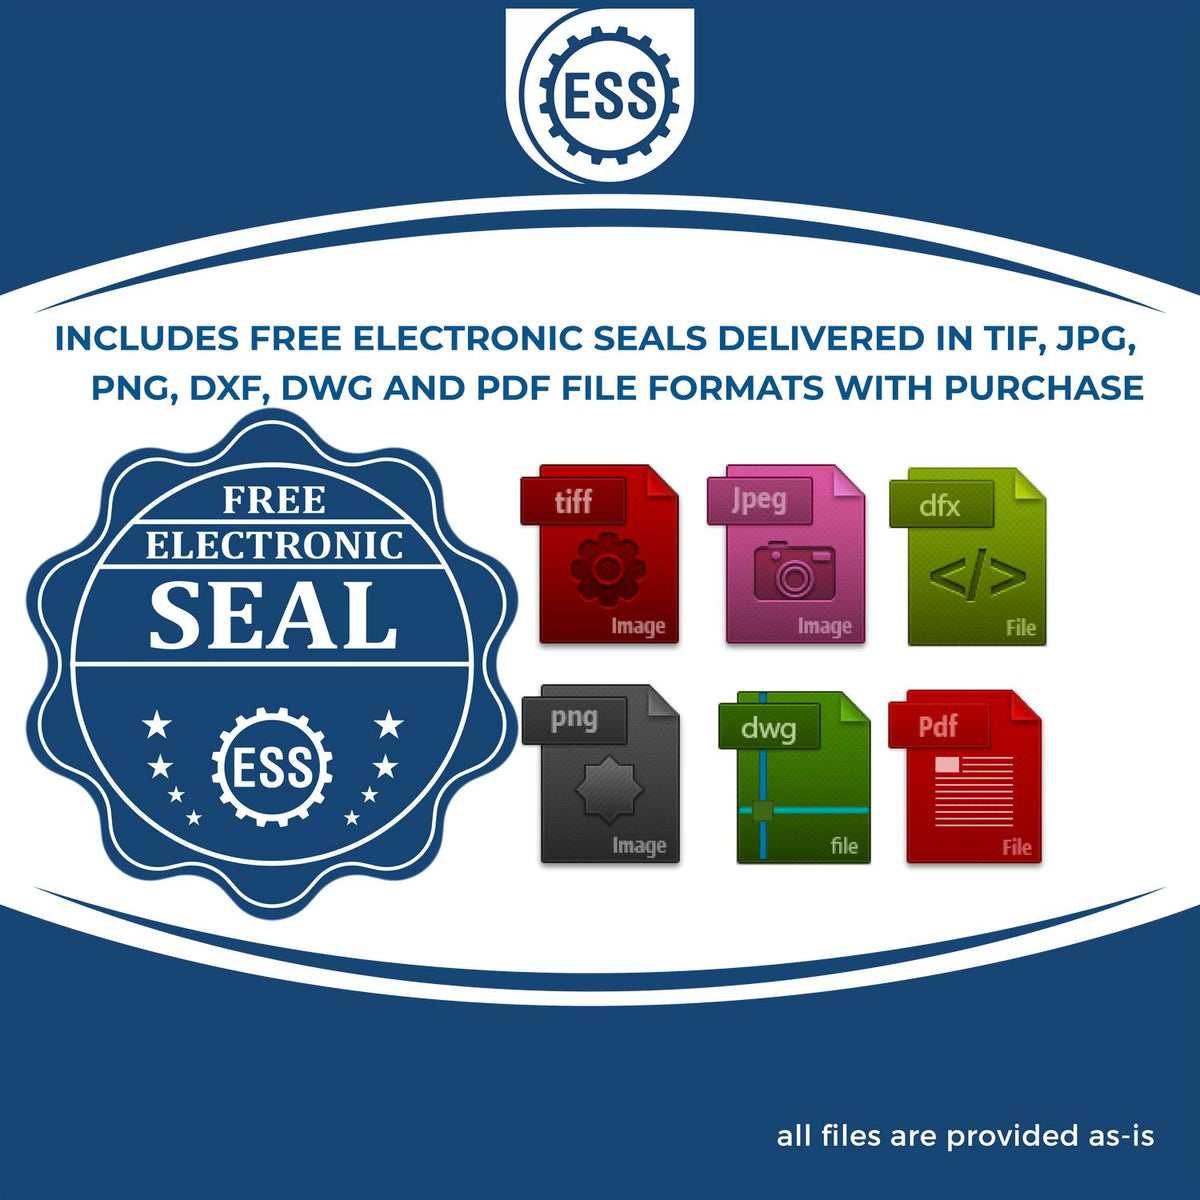 An infographic for the free electronic seal for the Soft Iowa Professional Geologist Seal illustrating the different file type icons such as DXF, DWG, TIF, JPG and PNG.